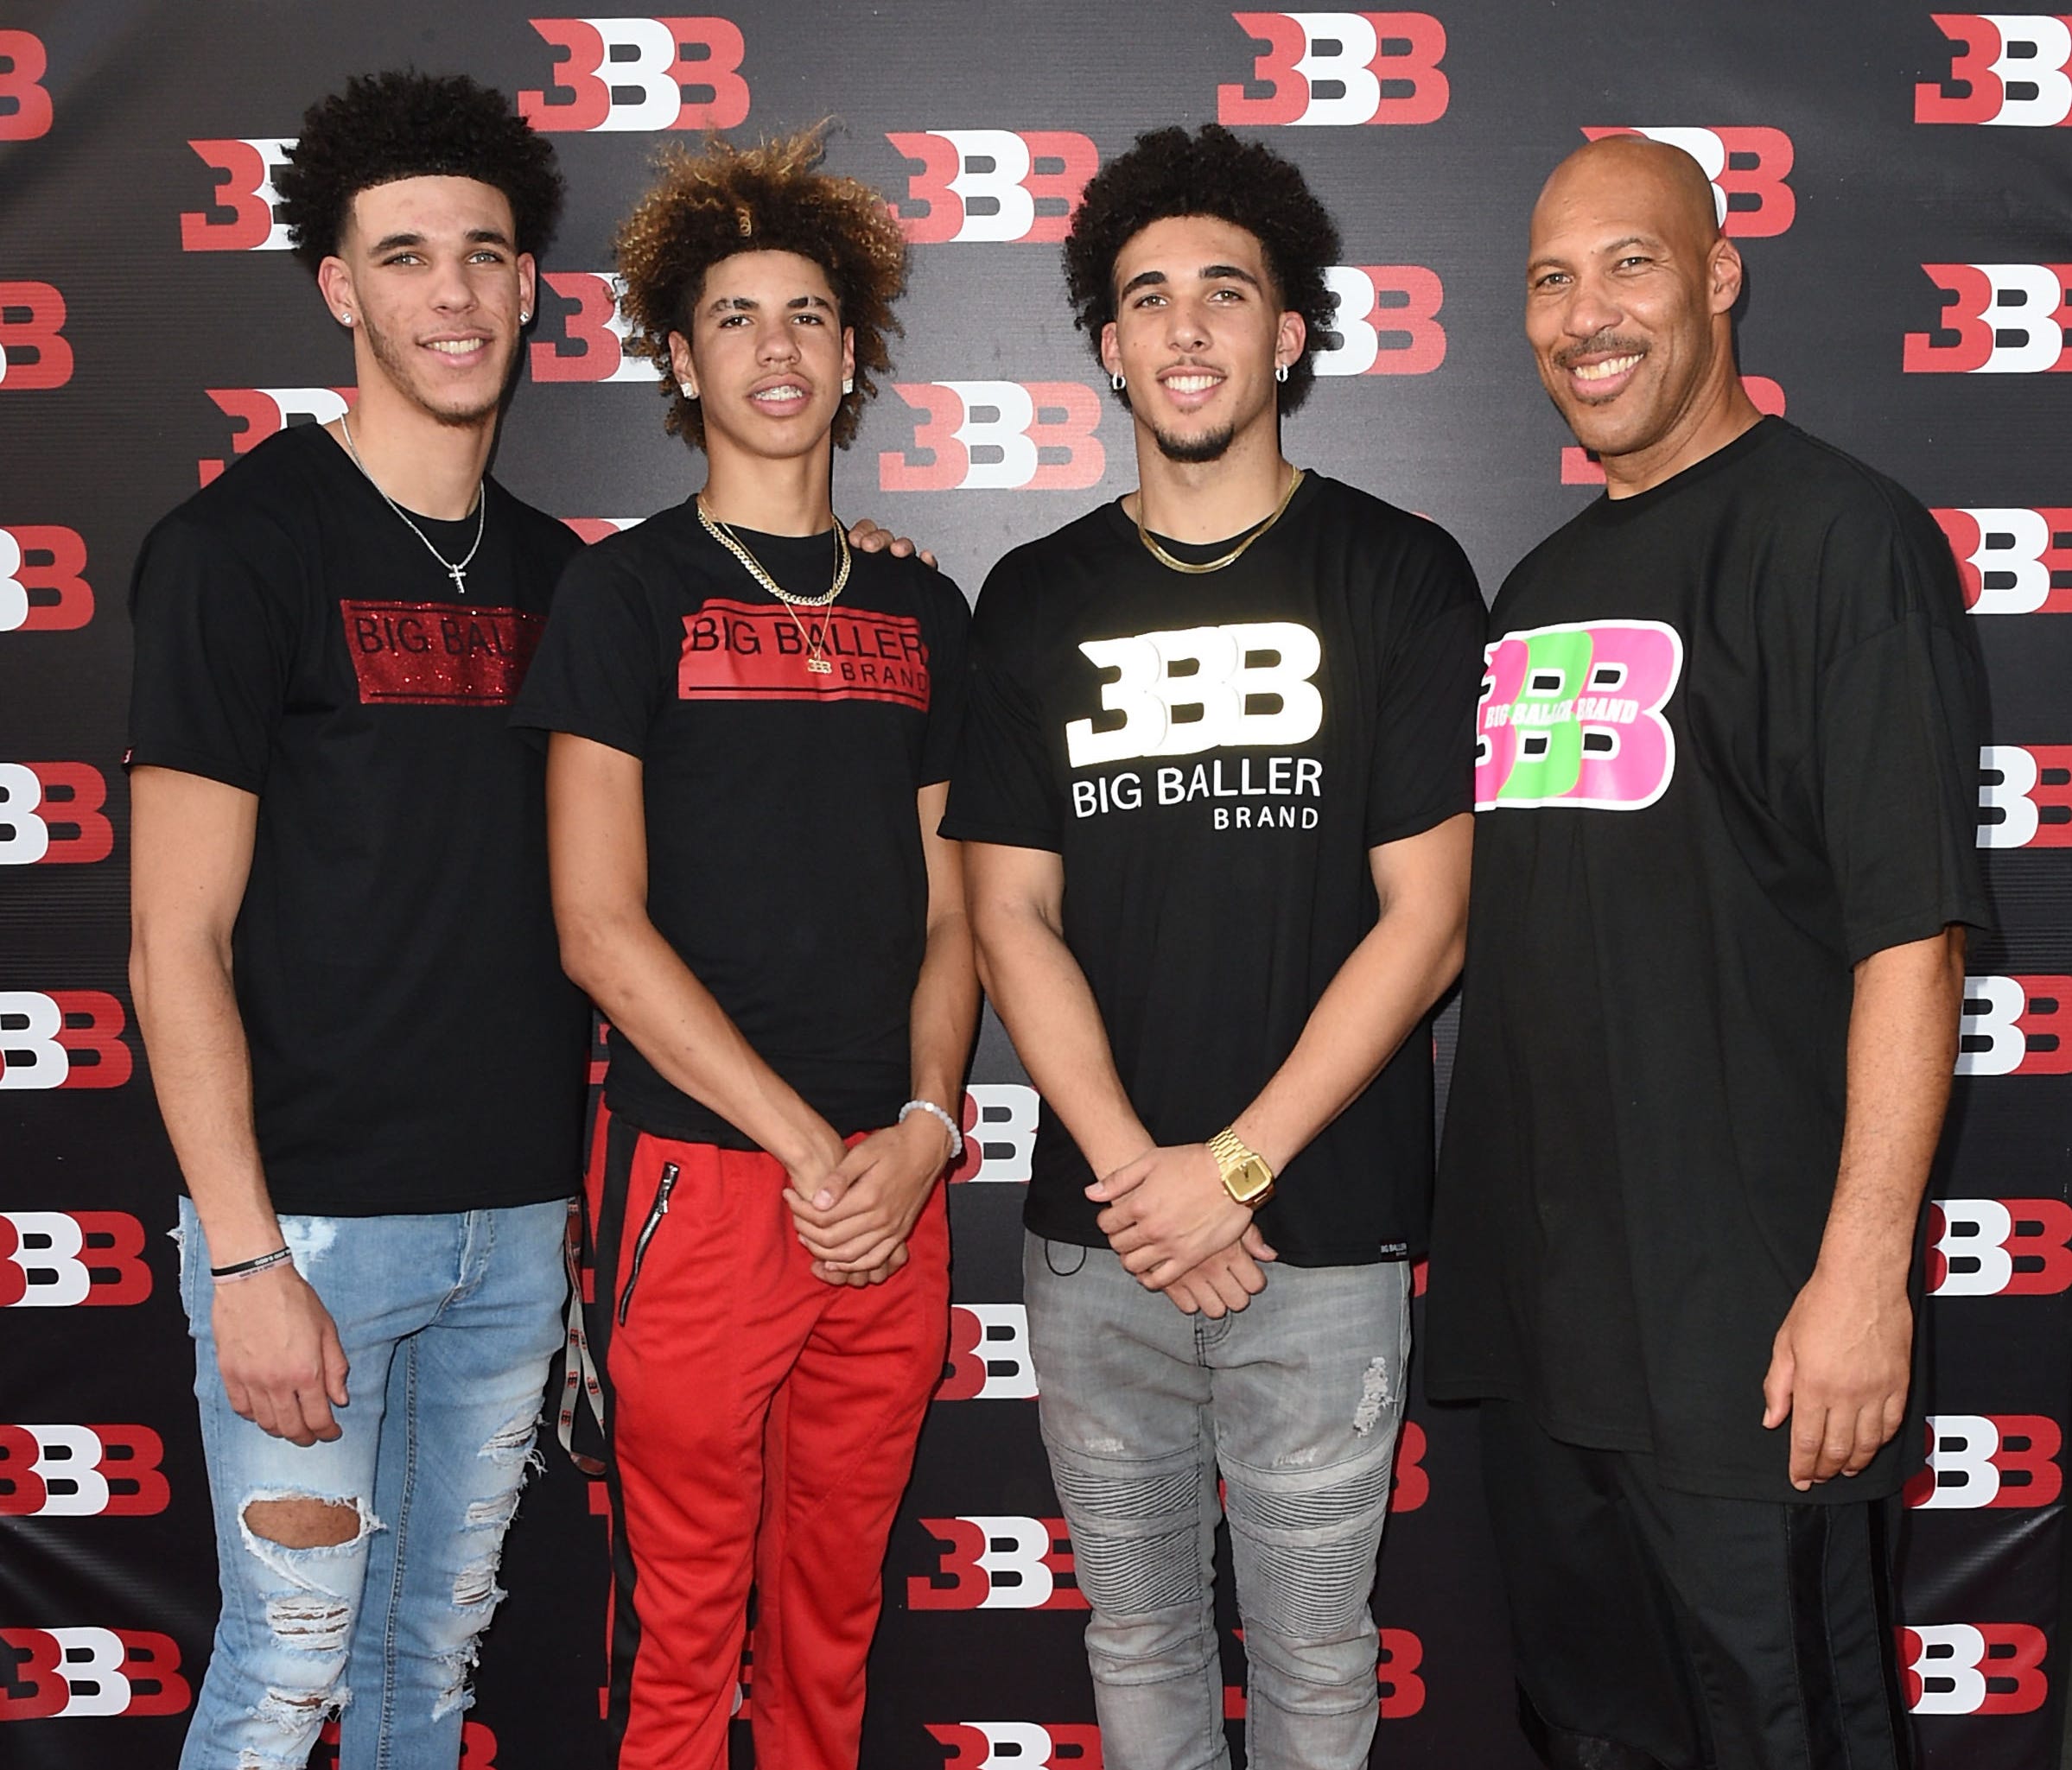 Lonzo Ball, LaMelo Ball, LiAngelo Ball and LaVar Ball attend Melo Ball's 16th Birthday on September 2, 2017 in Chino, California.